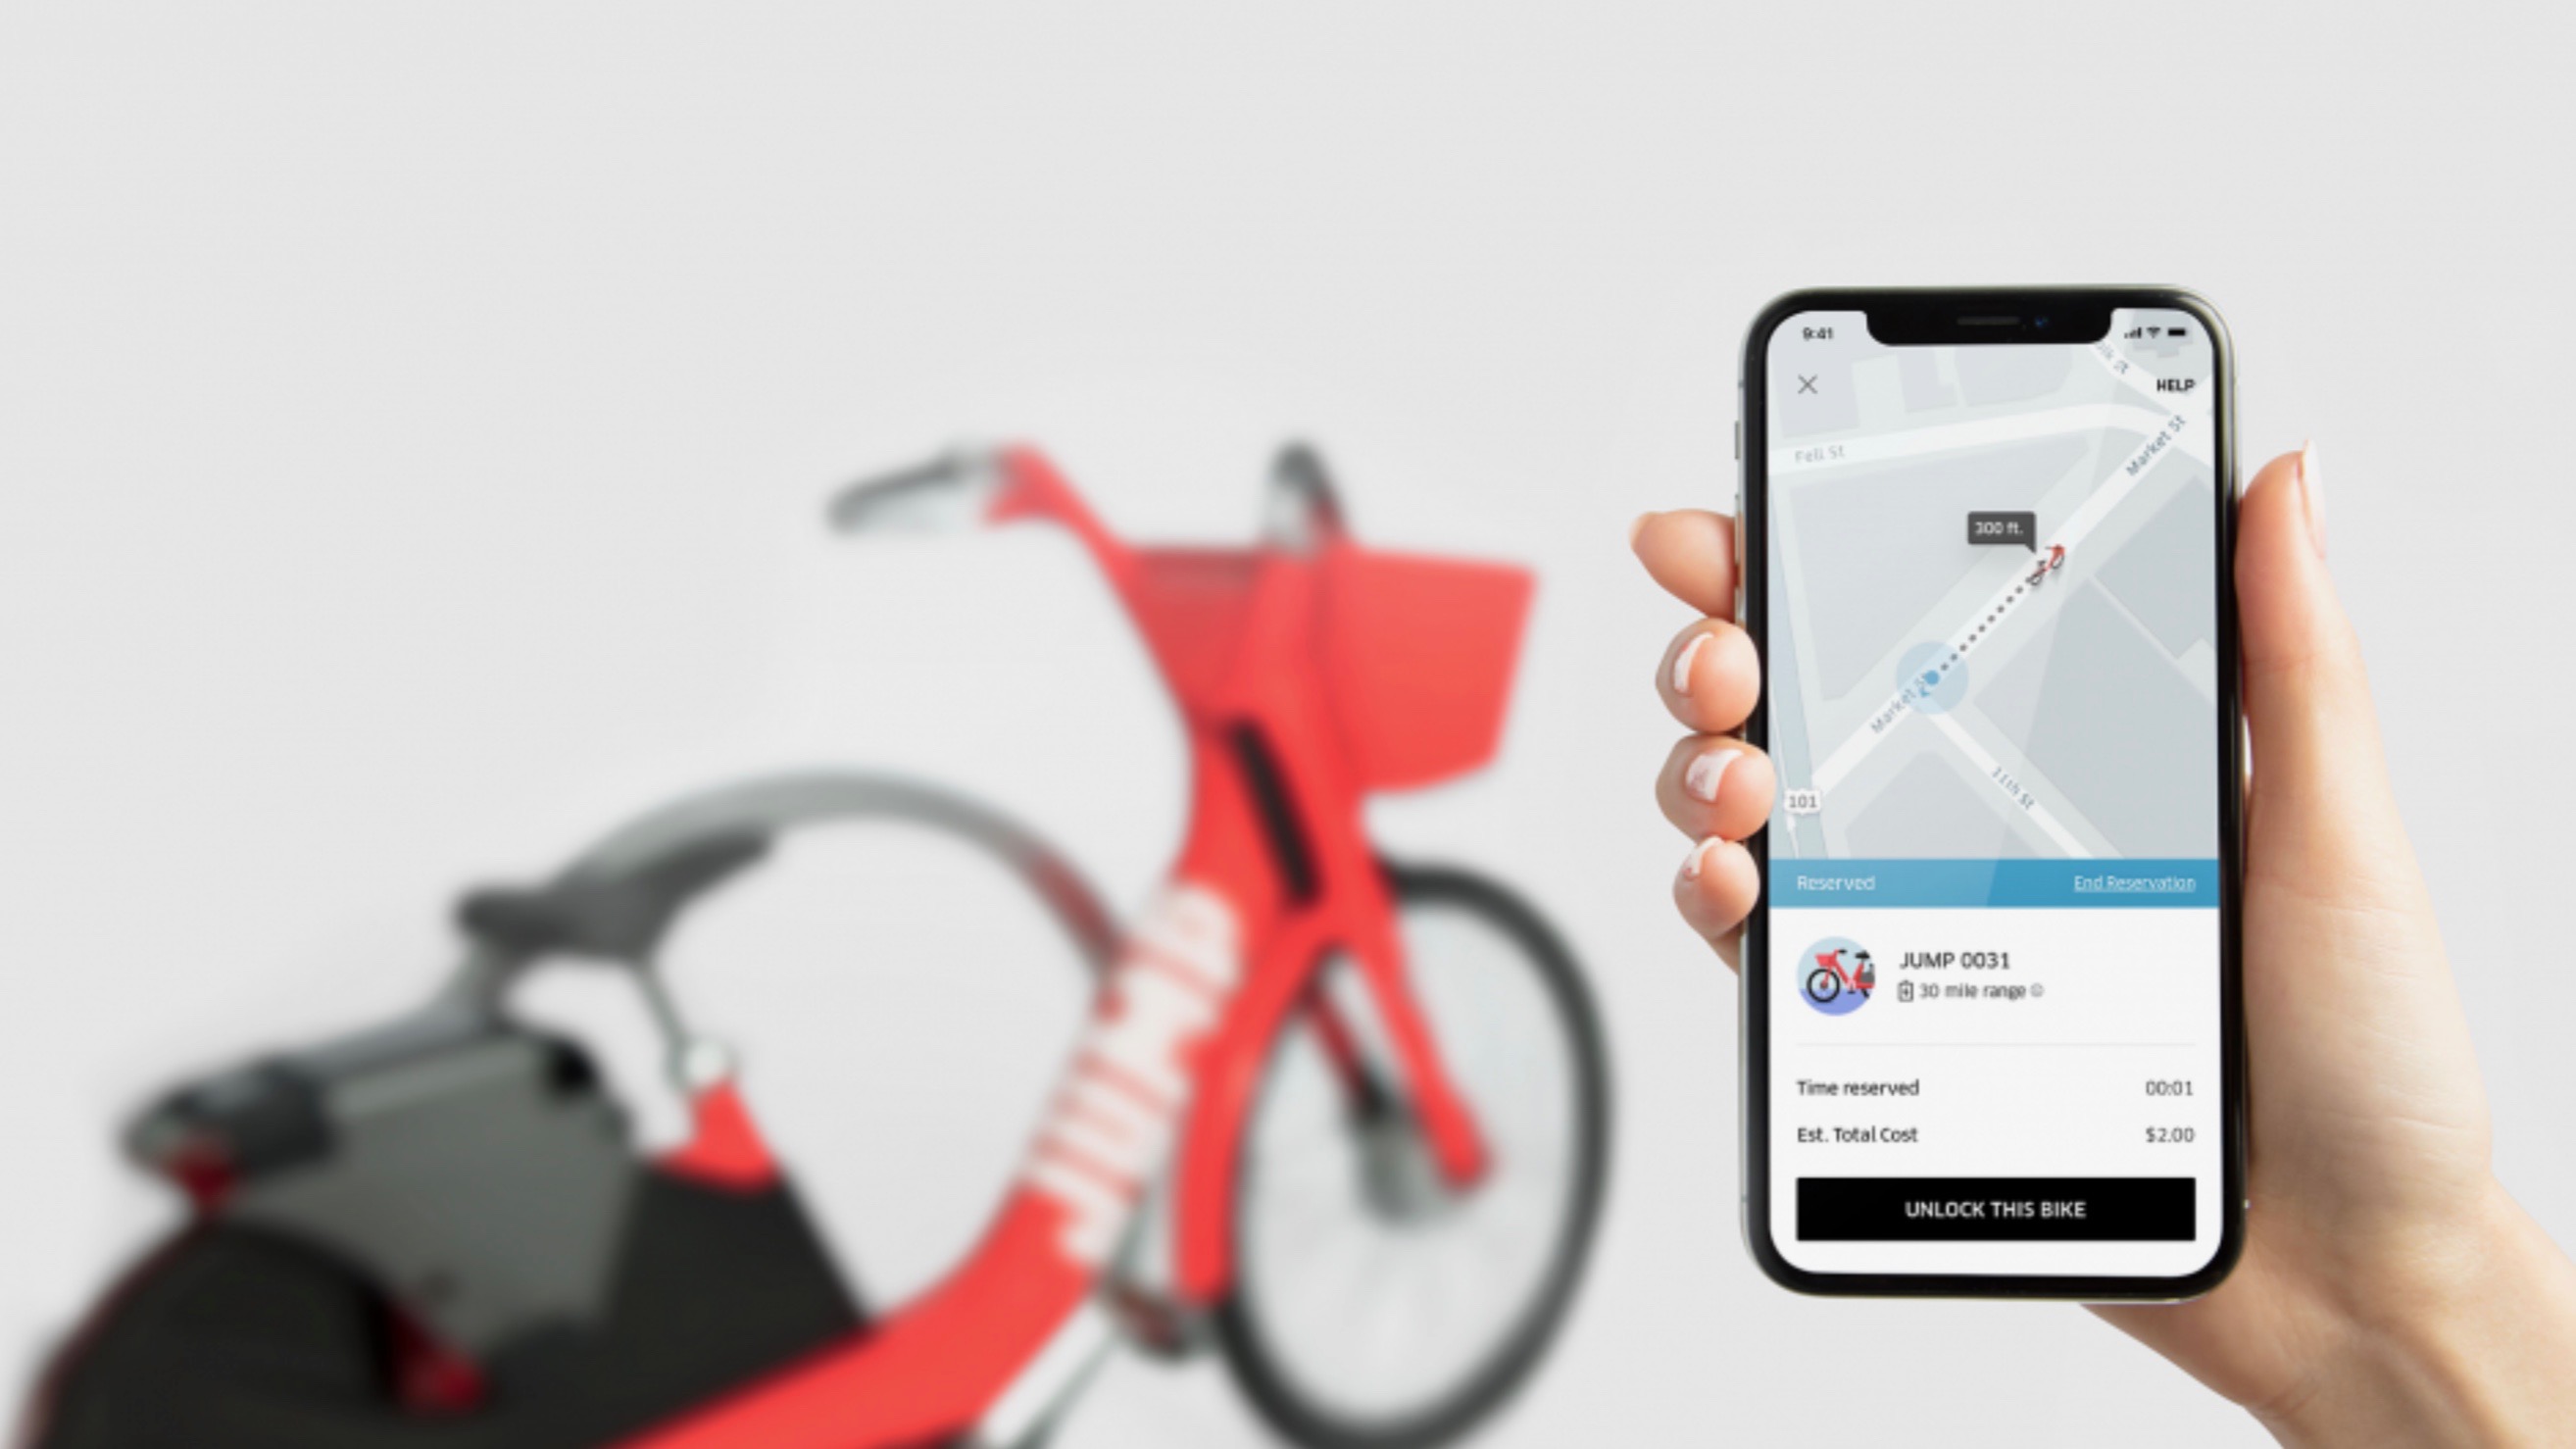 uber bikes and scooters